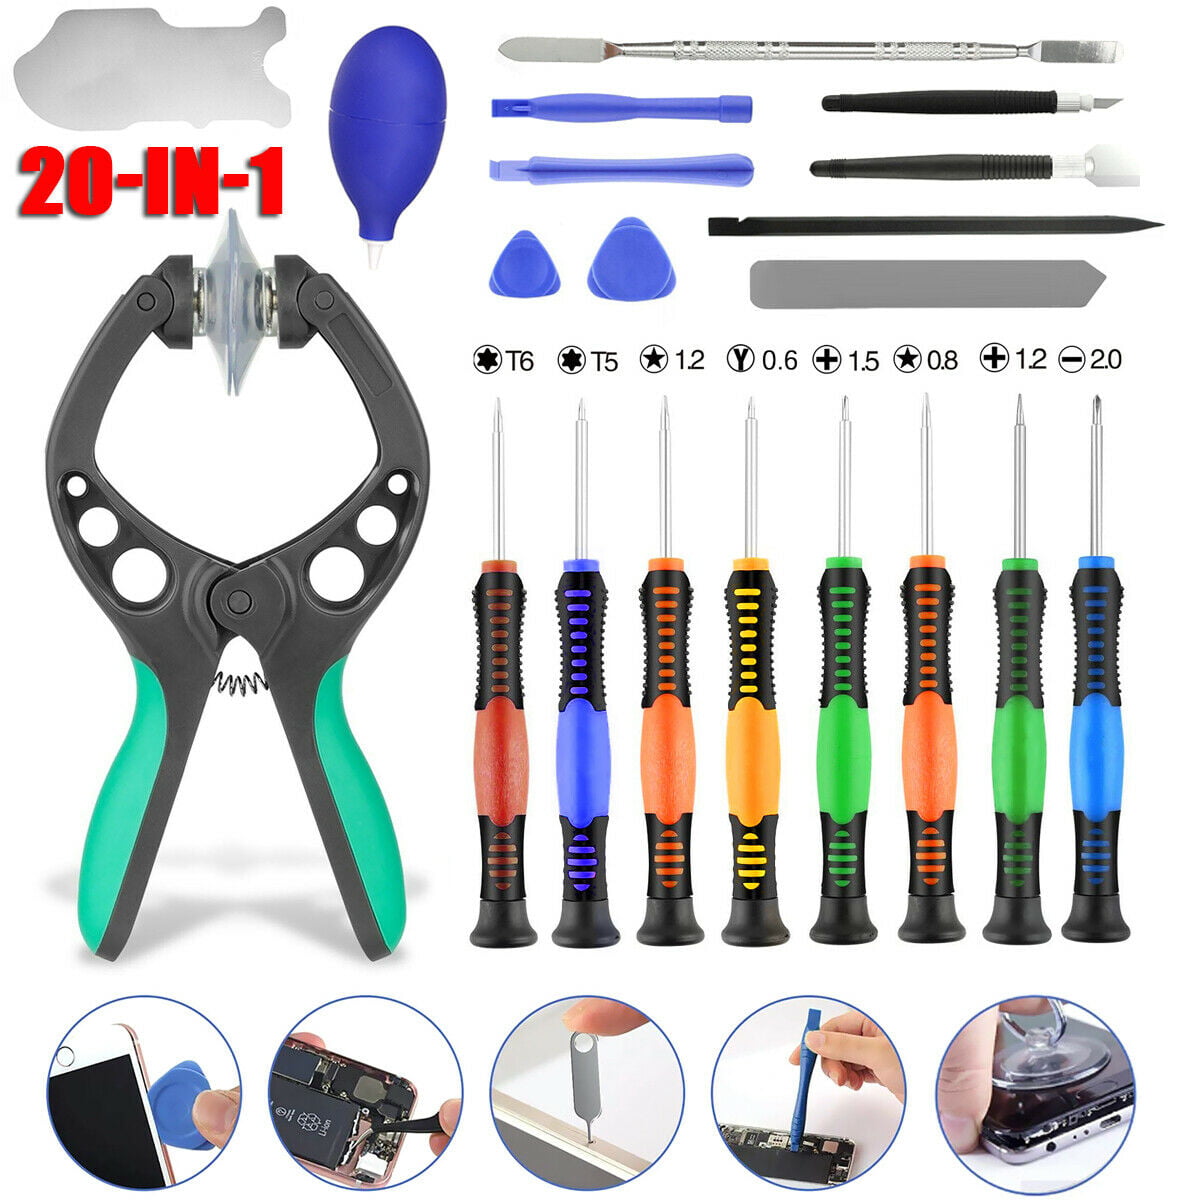 Details about   5x Smart Phone Battery Disassembly Tool Opening Pry Battery Removal Repair  LuTs 